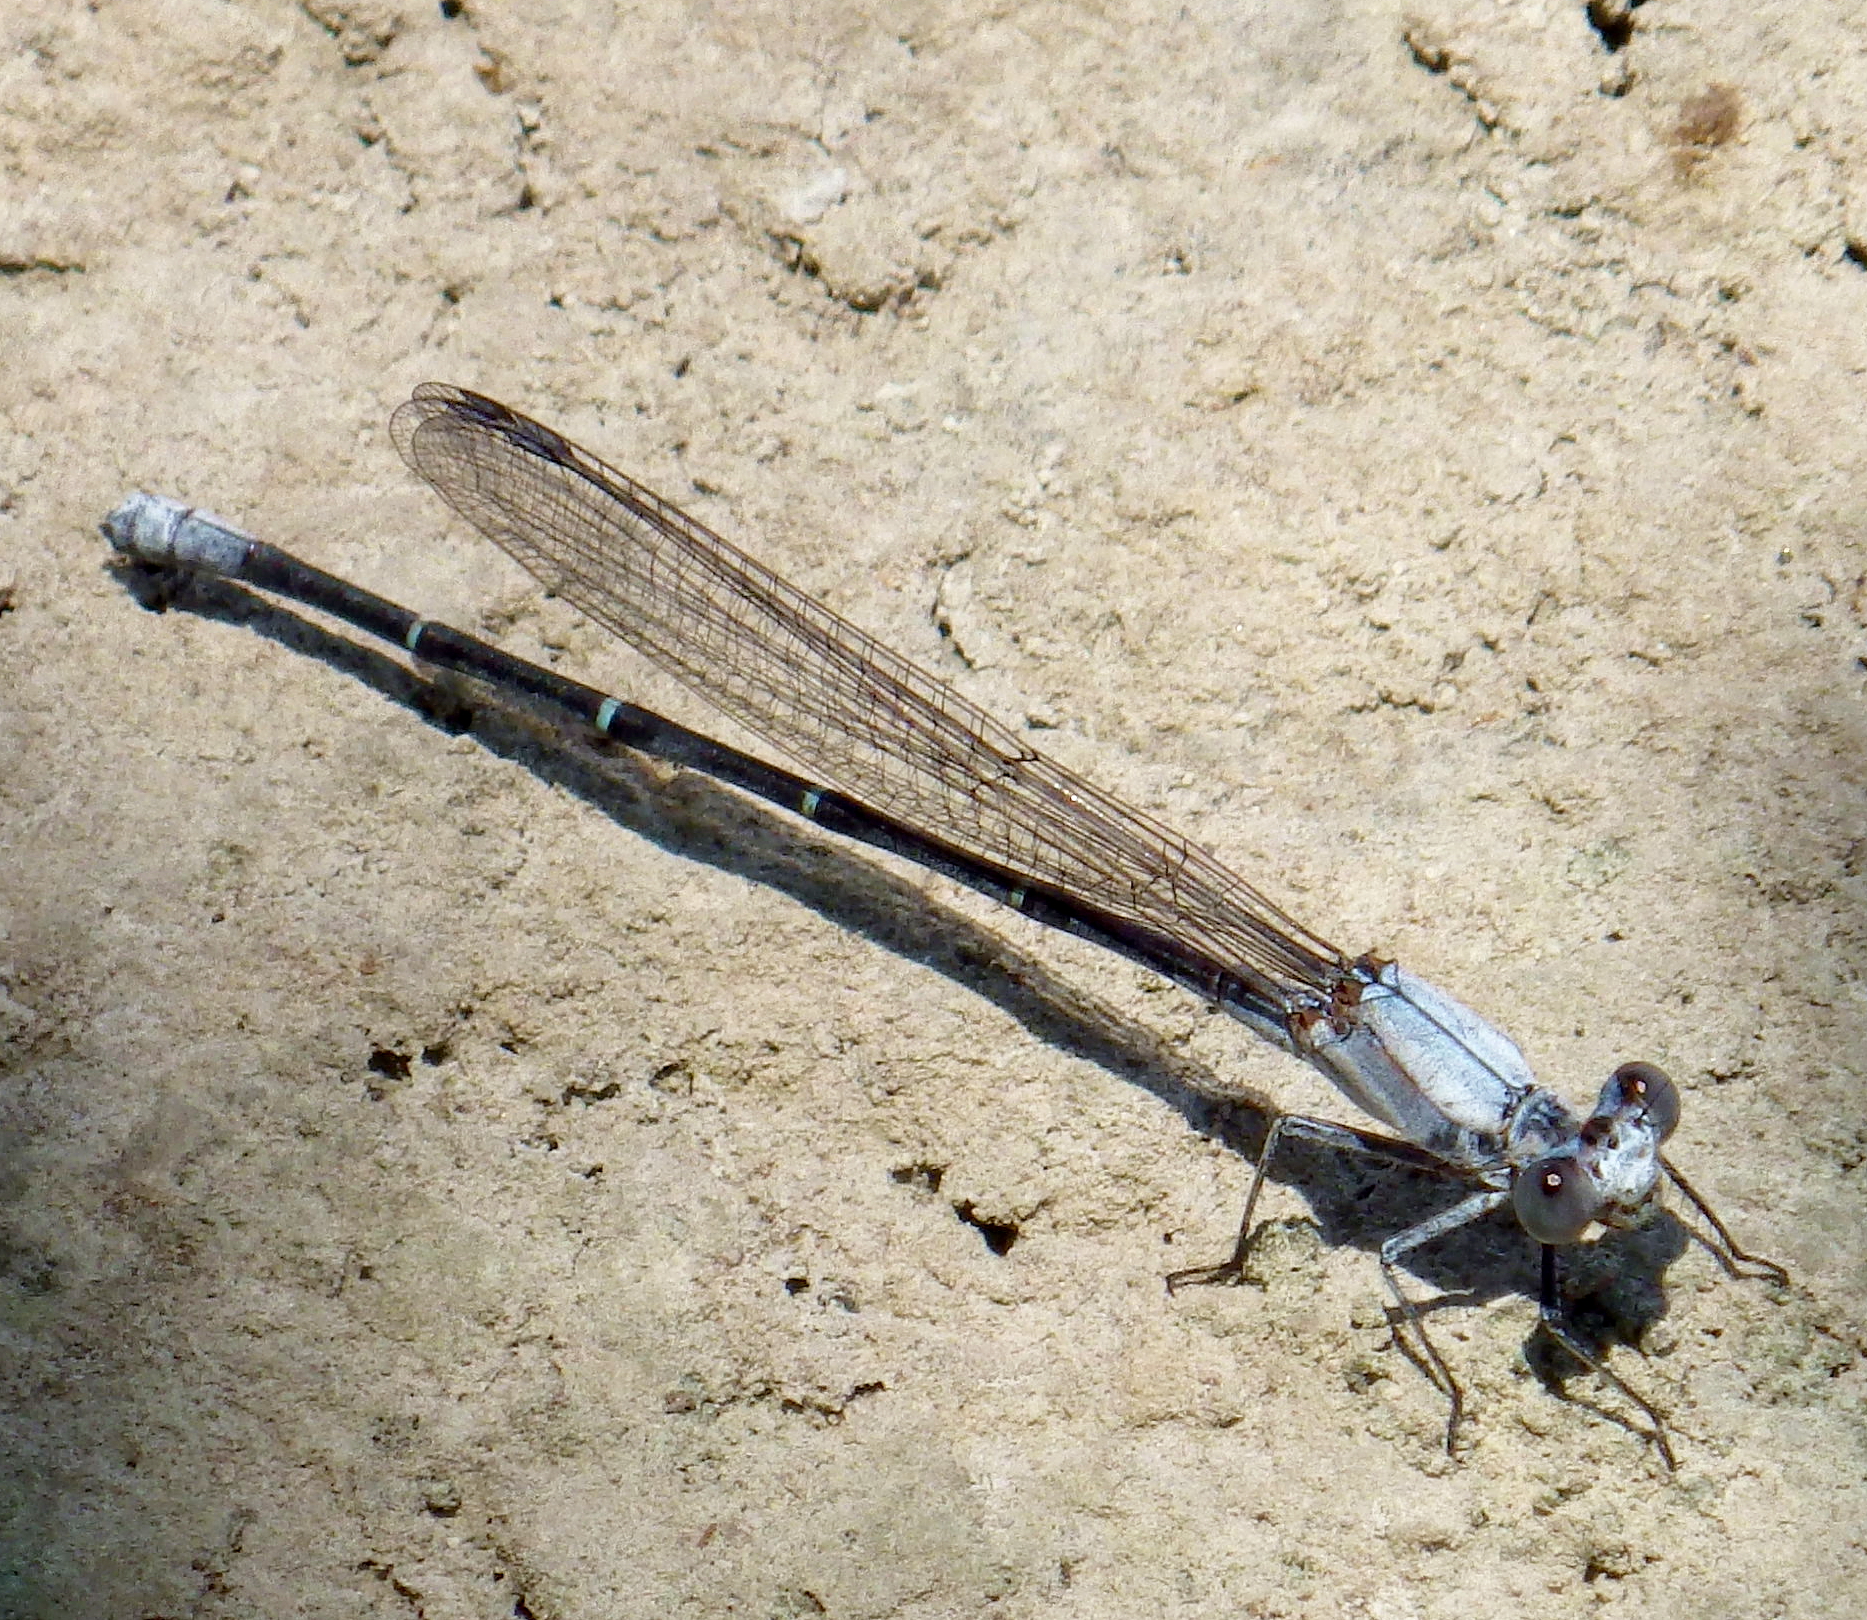 a dragon fly with its wings extended on the ground